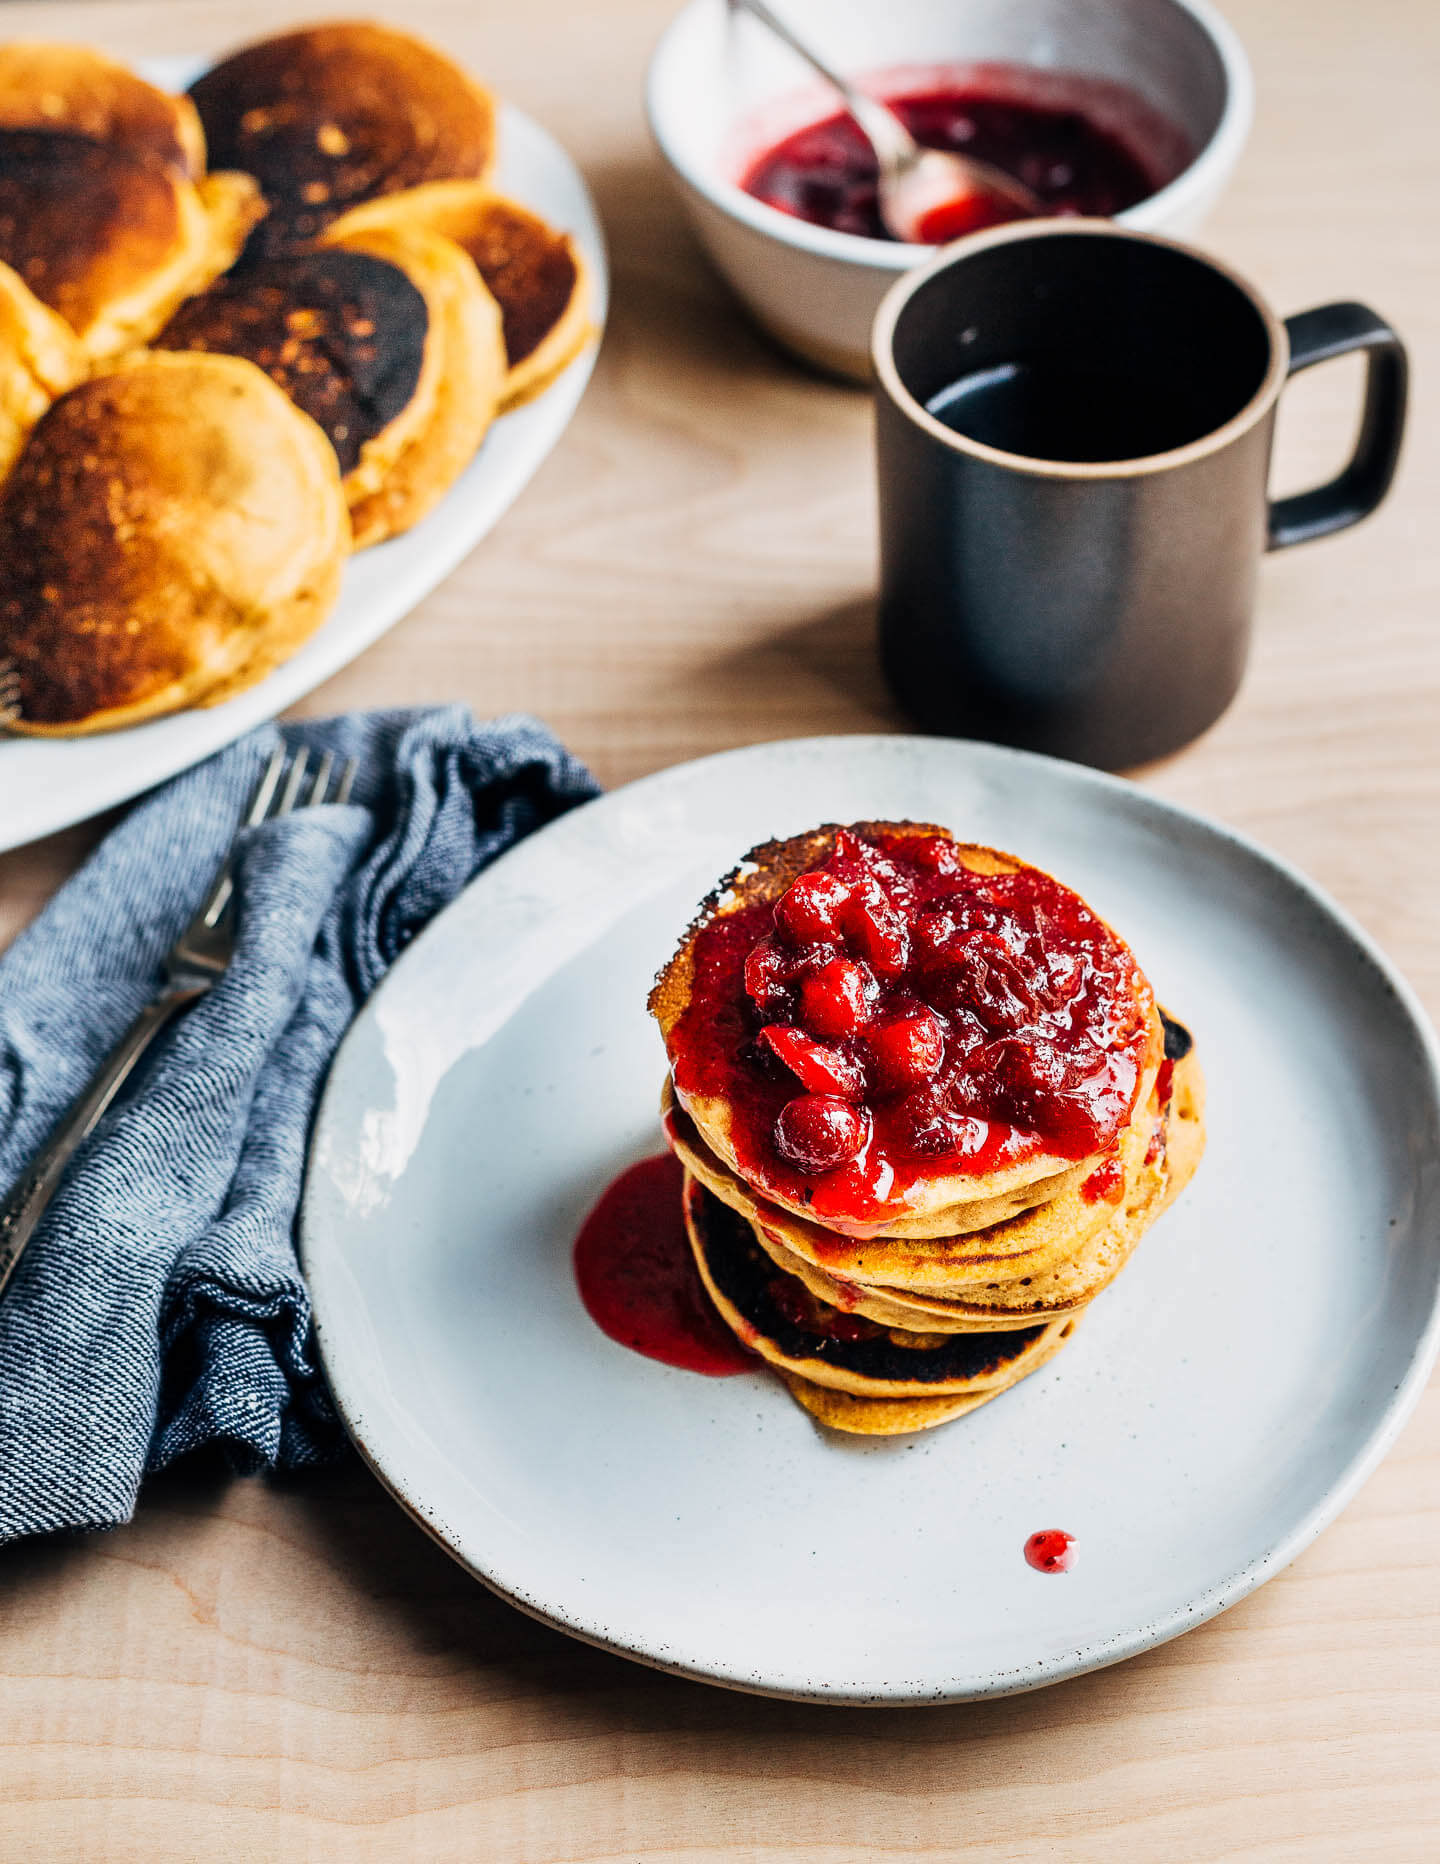 Use up your leftover pumpkin puree and cranberry sauce with this simple recipe for vegan pumpkin pancakes with cranberry maple syrup.